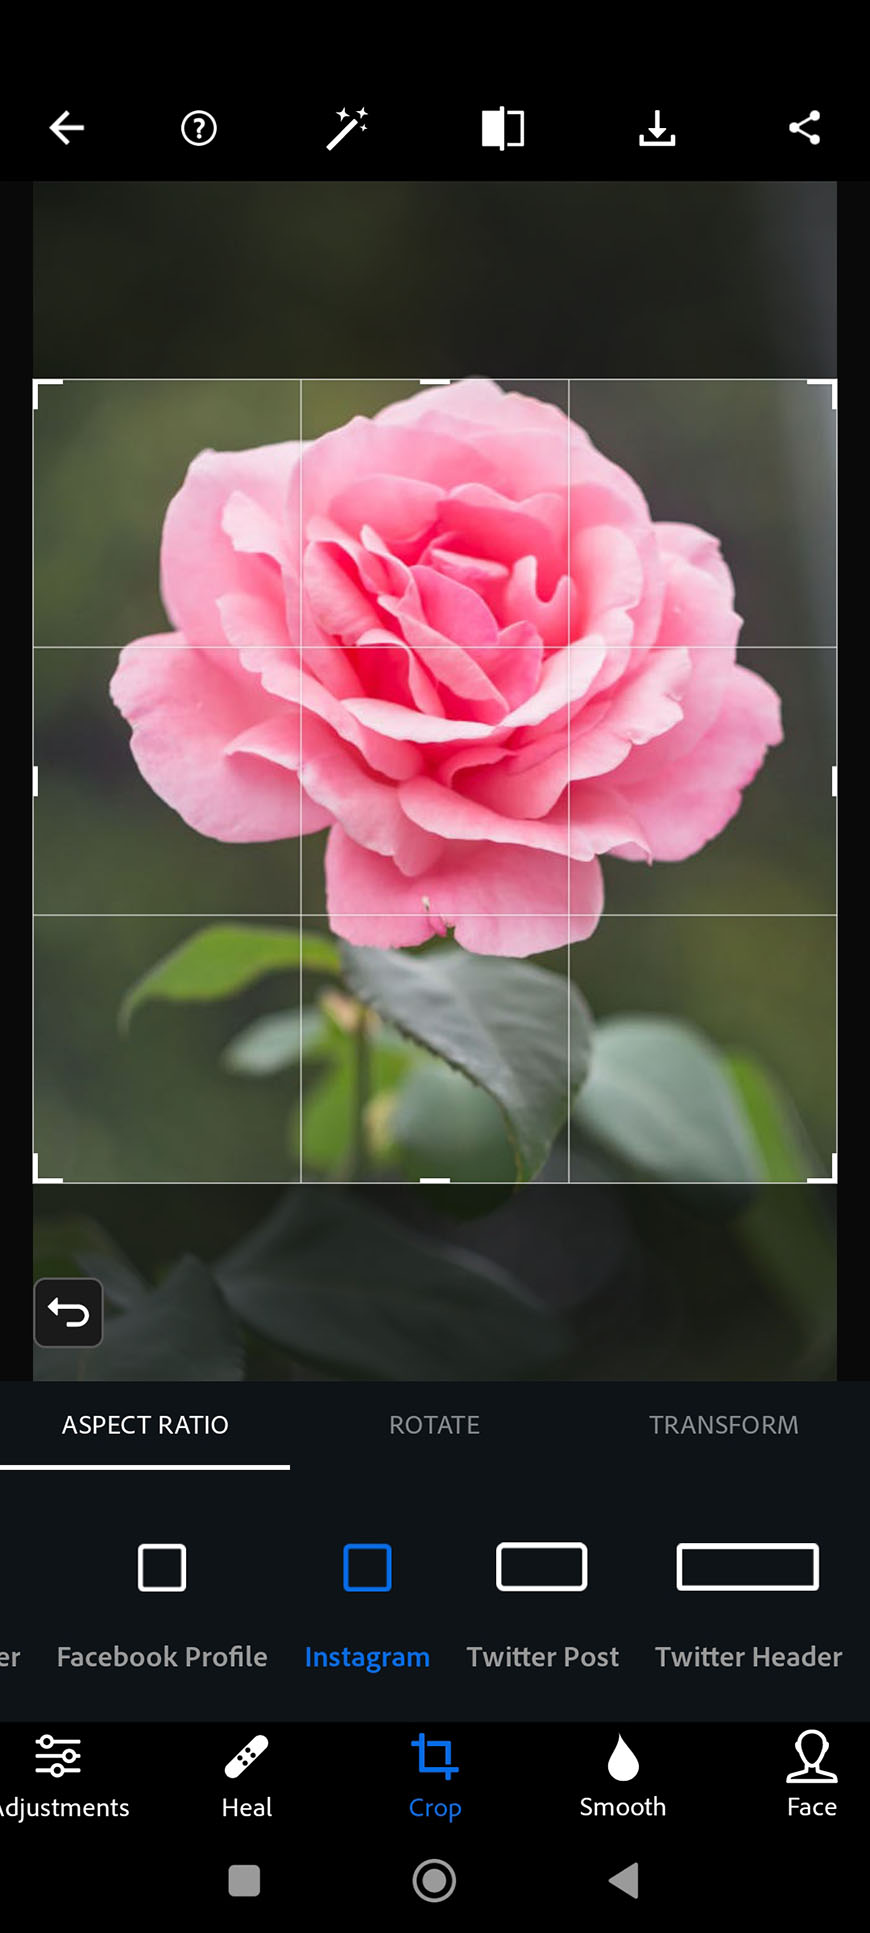 Image of a pink rose centered within a photo editing app interface, with overlaying grid lines and editing tools visible.